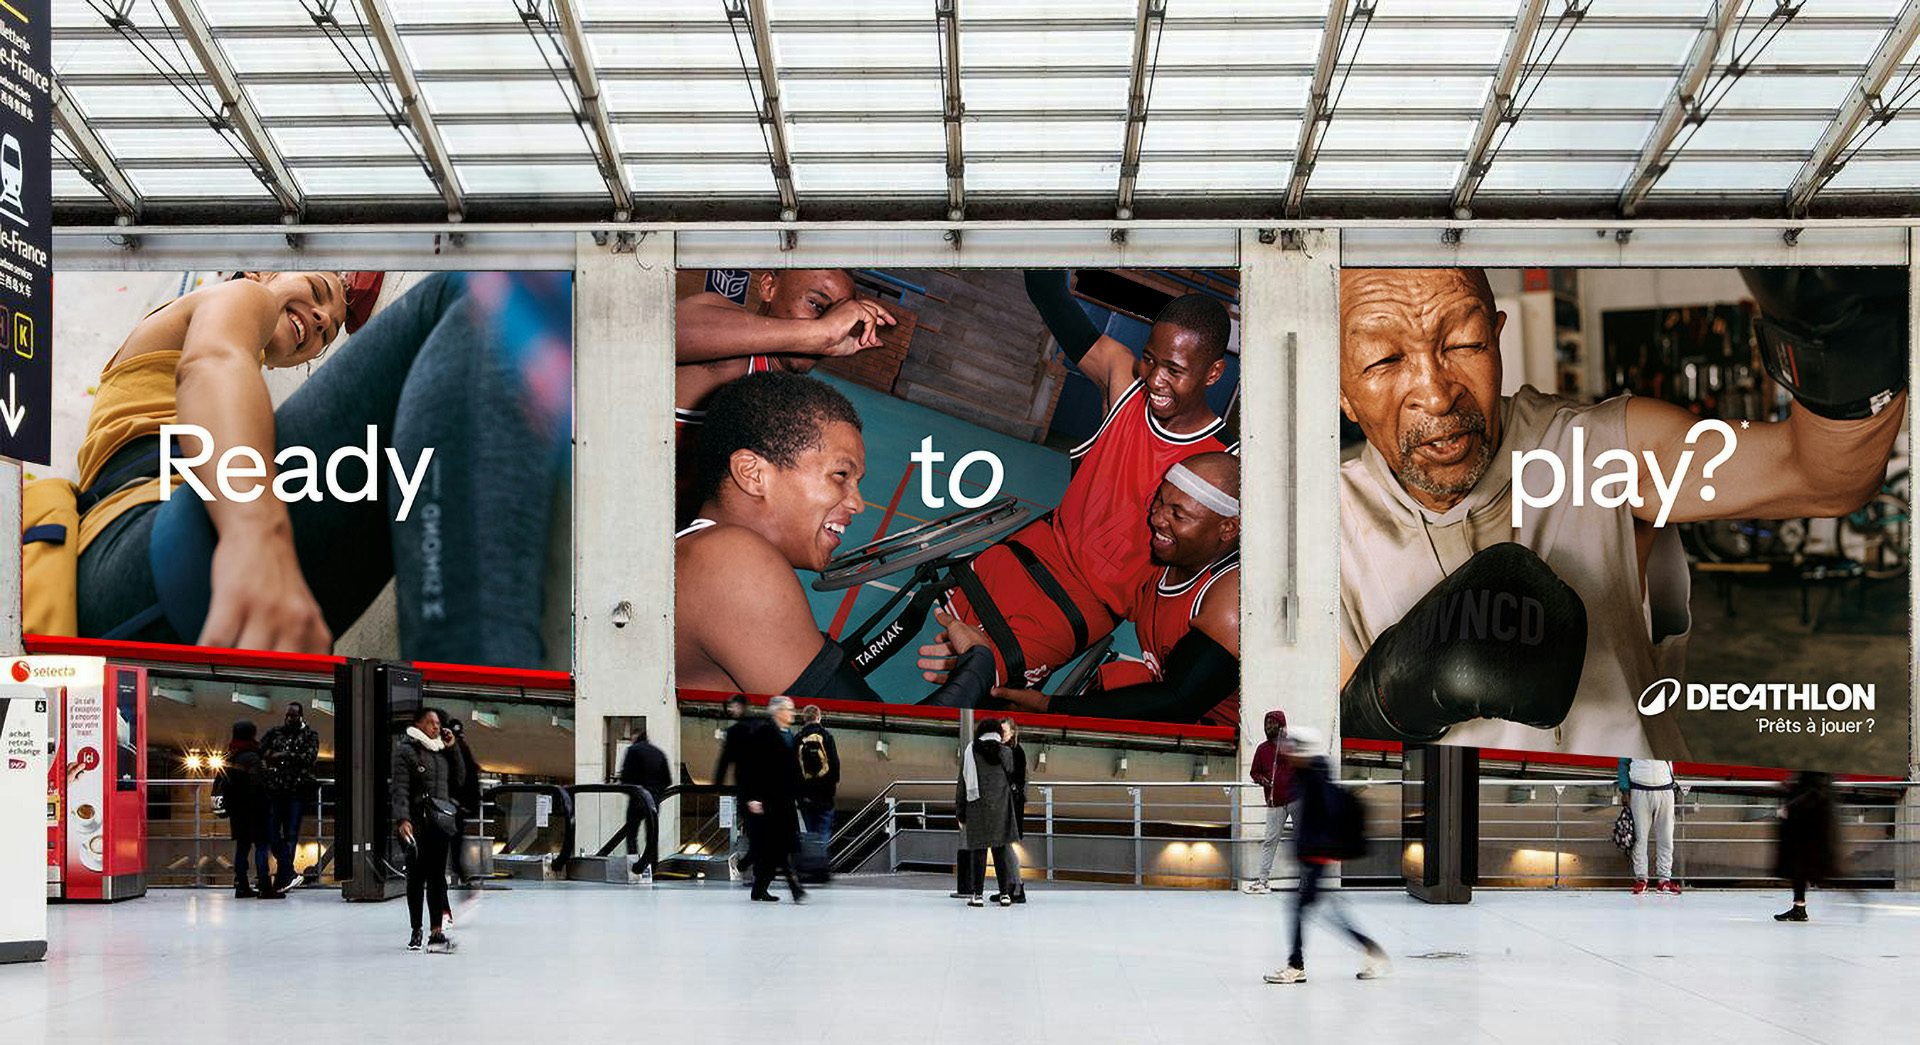 Image shows three out of home billboards created as part of a new Decathlon campaign, featuring the campaign slogan 'ready to play?'